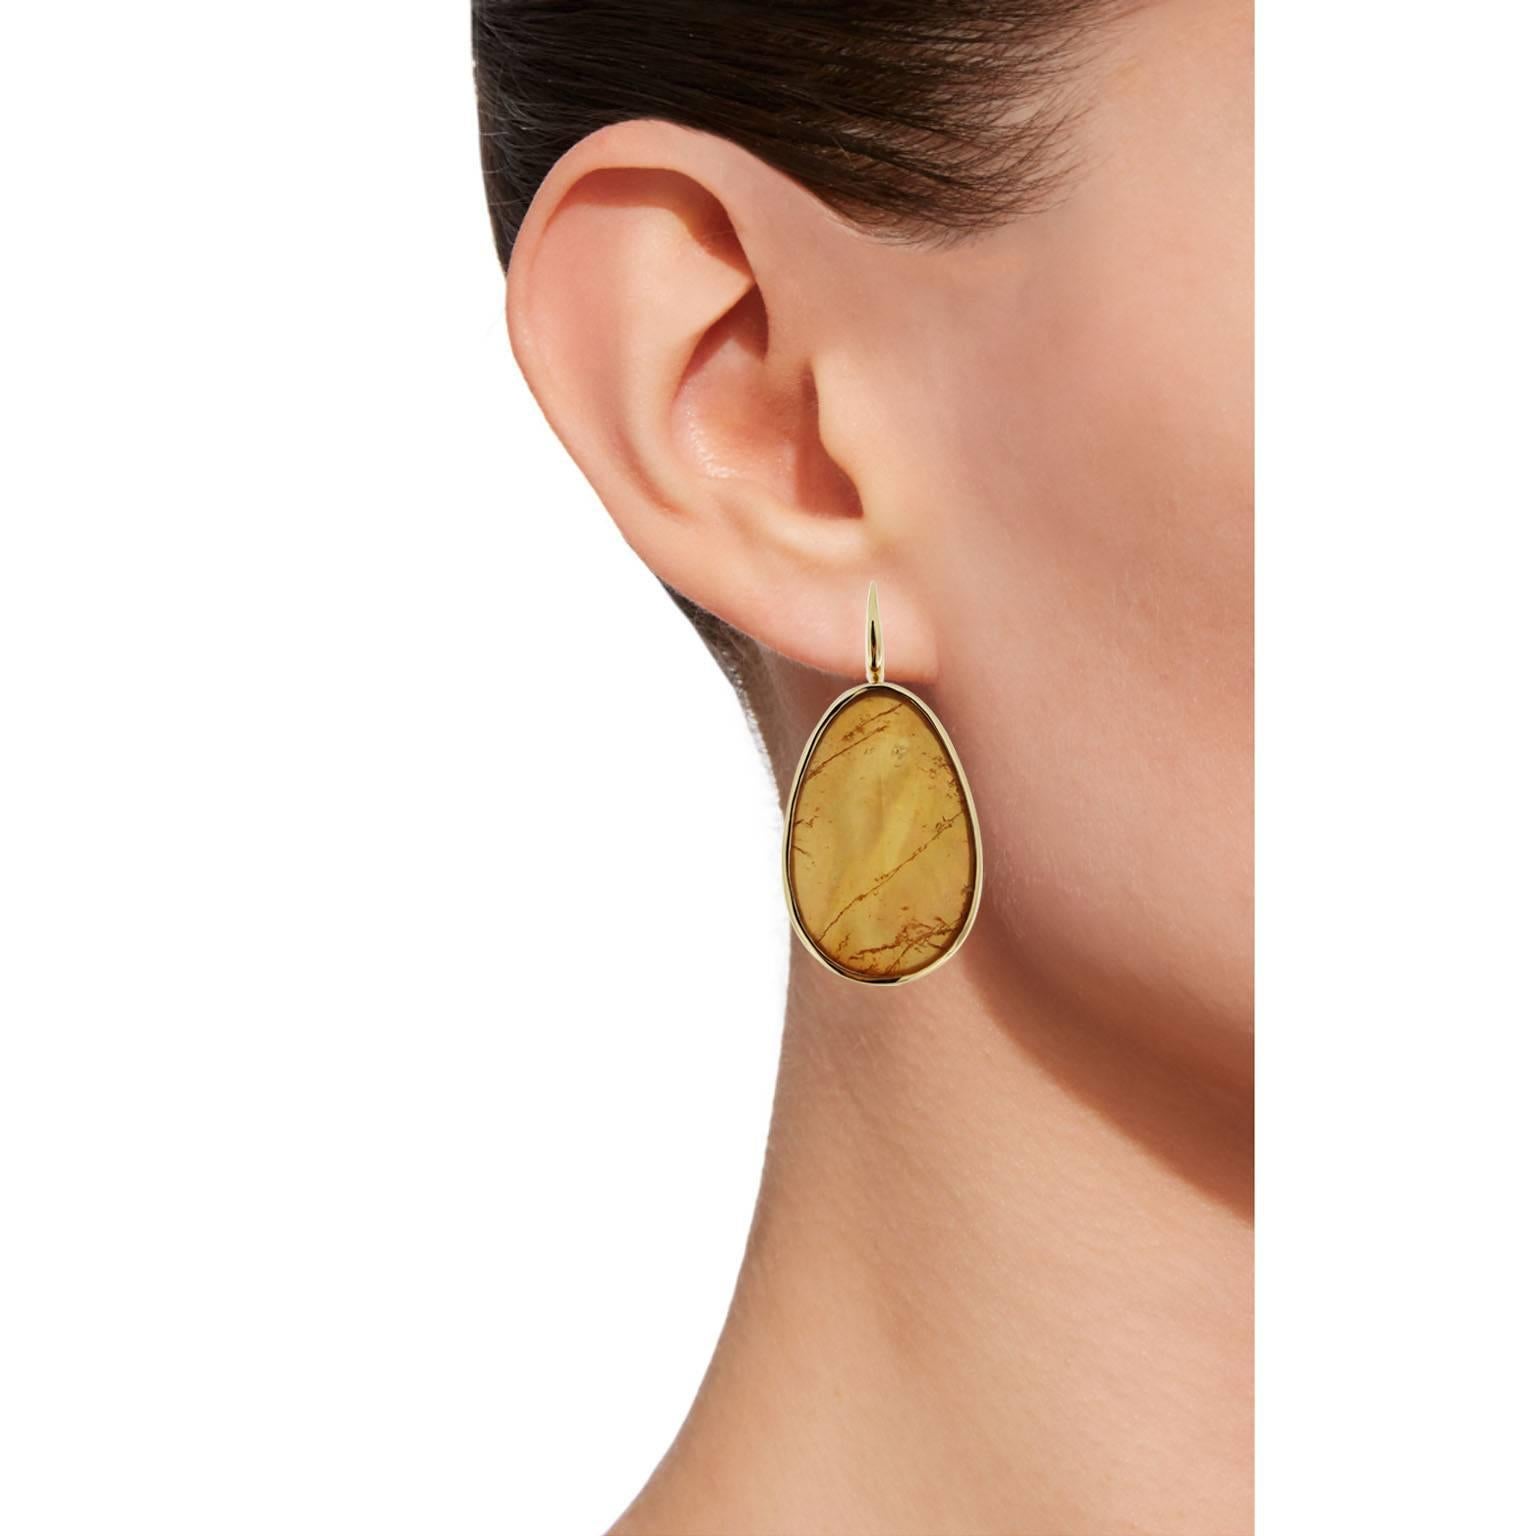 Jona design collection, hand crafted in Italy, 18 karat yellow gold pendant earrings set with two crazy cut quartz over yellow jade and mother of pearl drops.

Dimensions:
1.87 in. H x 0.88 in. W x 0.19 in. D
47 mm. H x 22 mm. W x 5 mm. D

All Jona